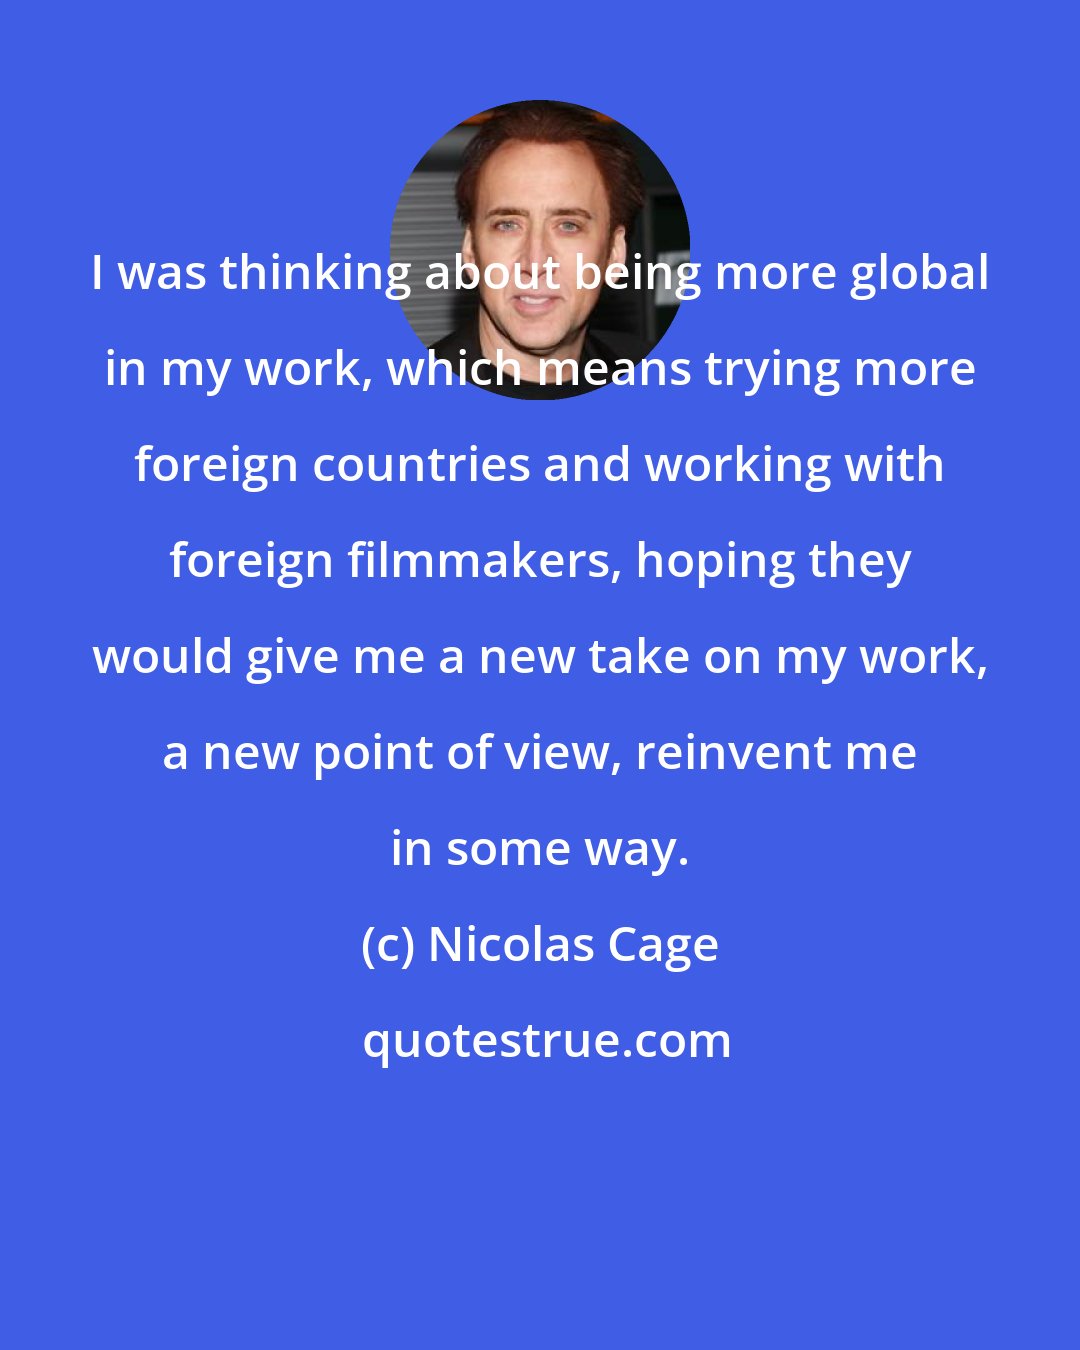 Nicolas Cage: I was thinking about being more global in my work, which means trying more foreign countries and working with foreign filmmakers, hoping they would give me a new take on my work, a new point of view, reinvent me in some way.